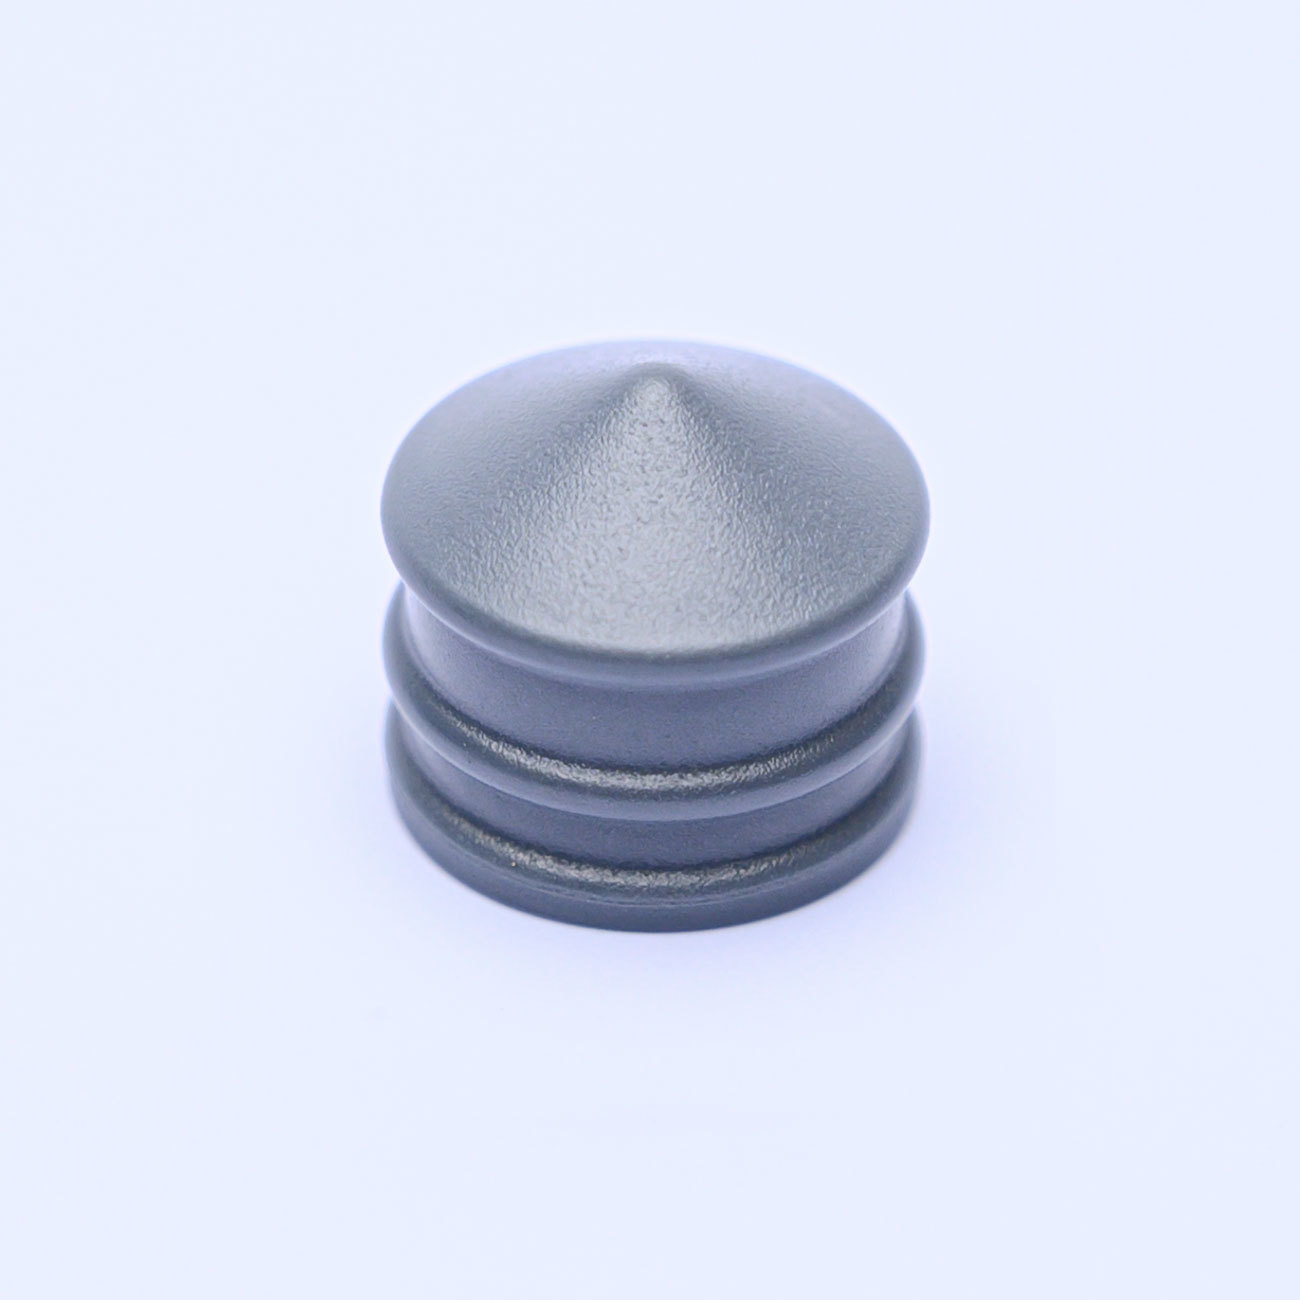 Halogenated butyl rubber stoppers for prefilled syringes